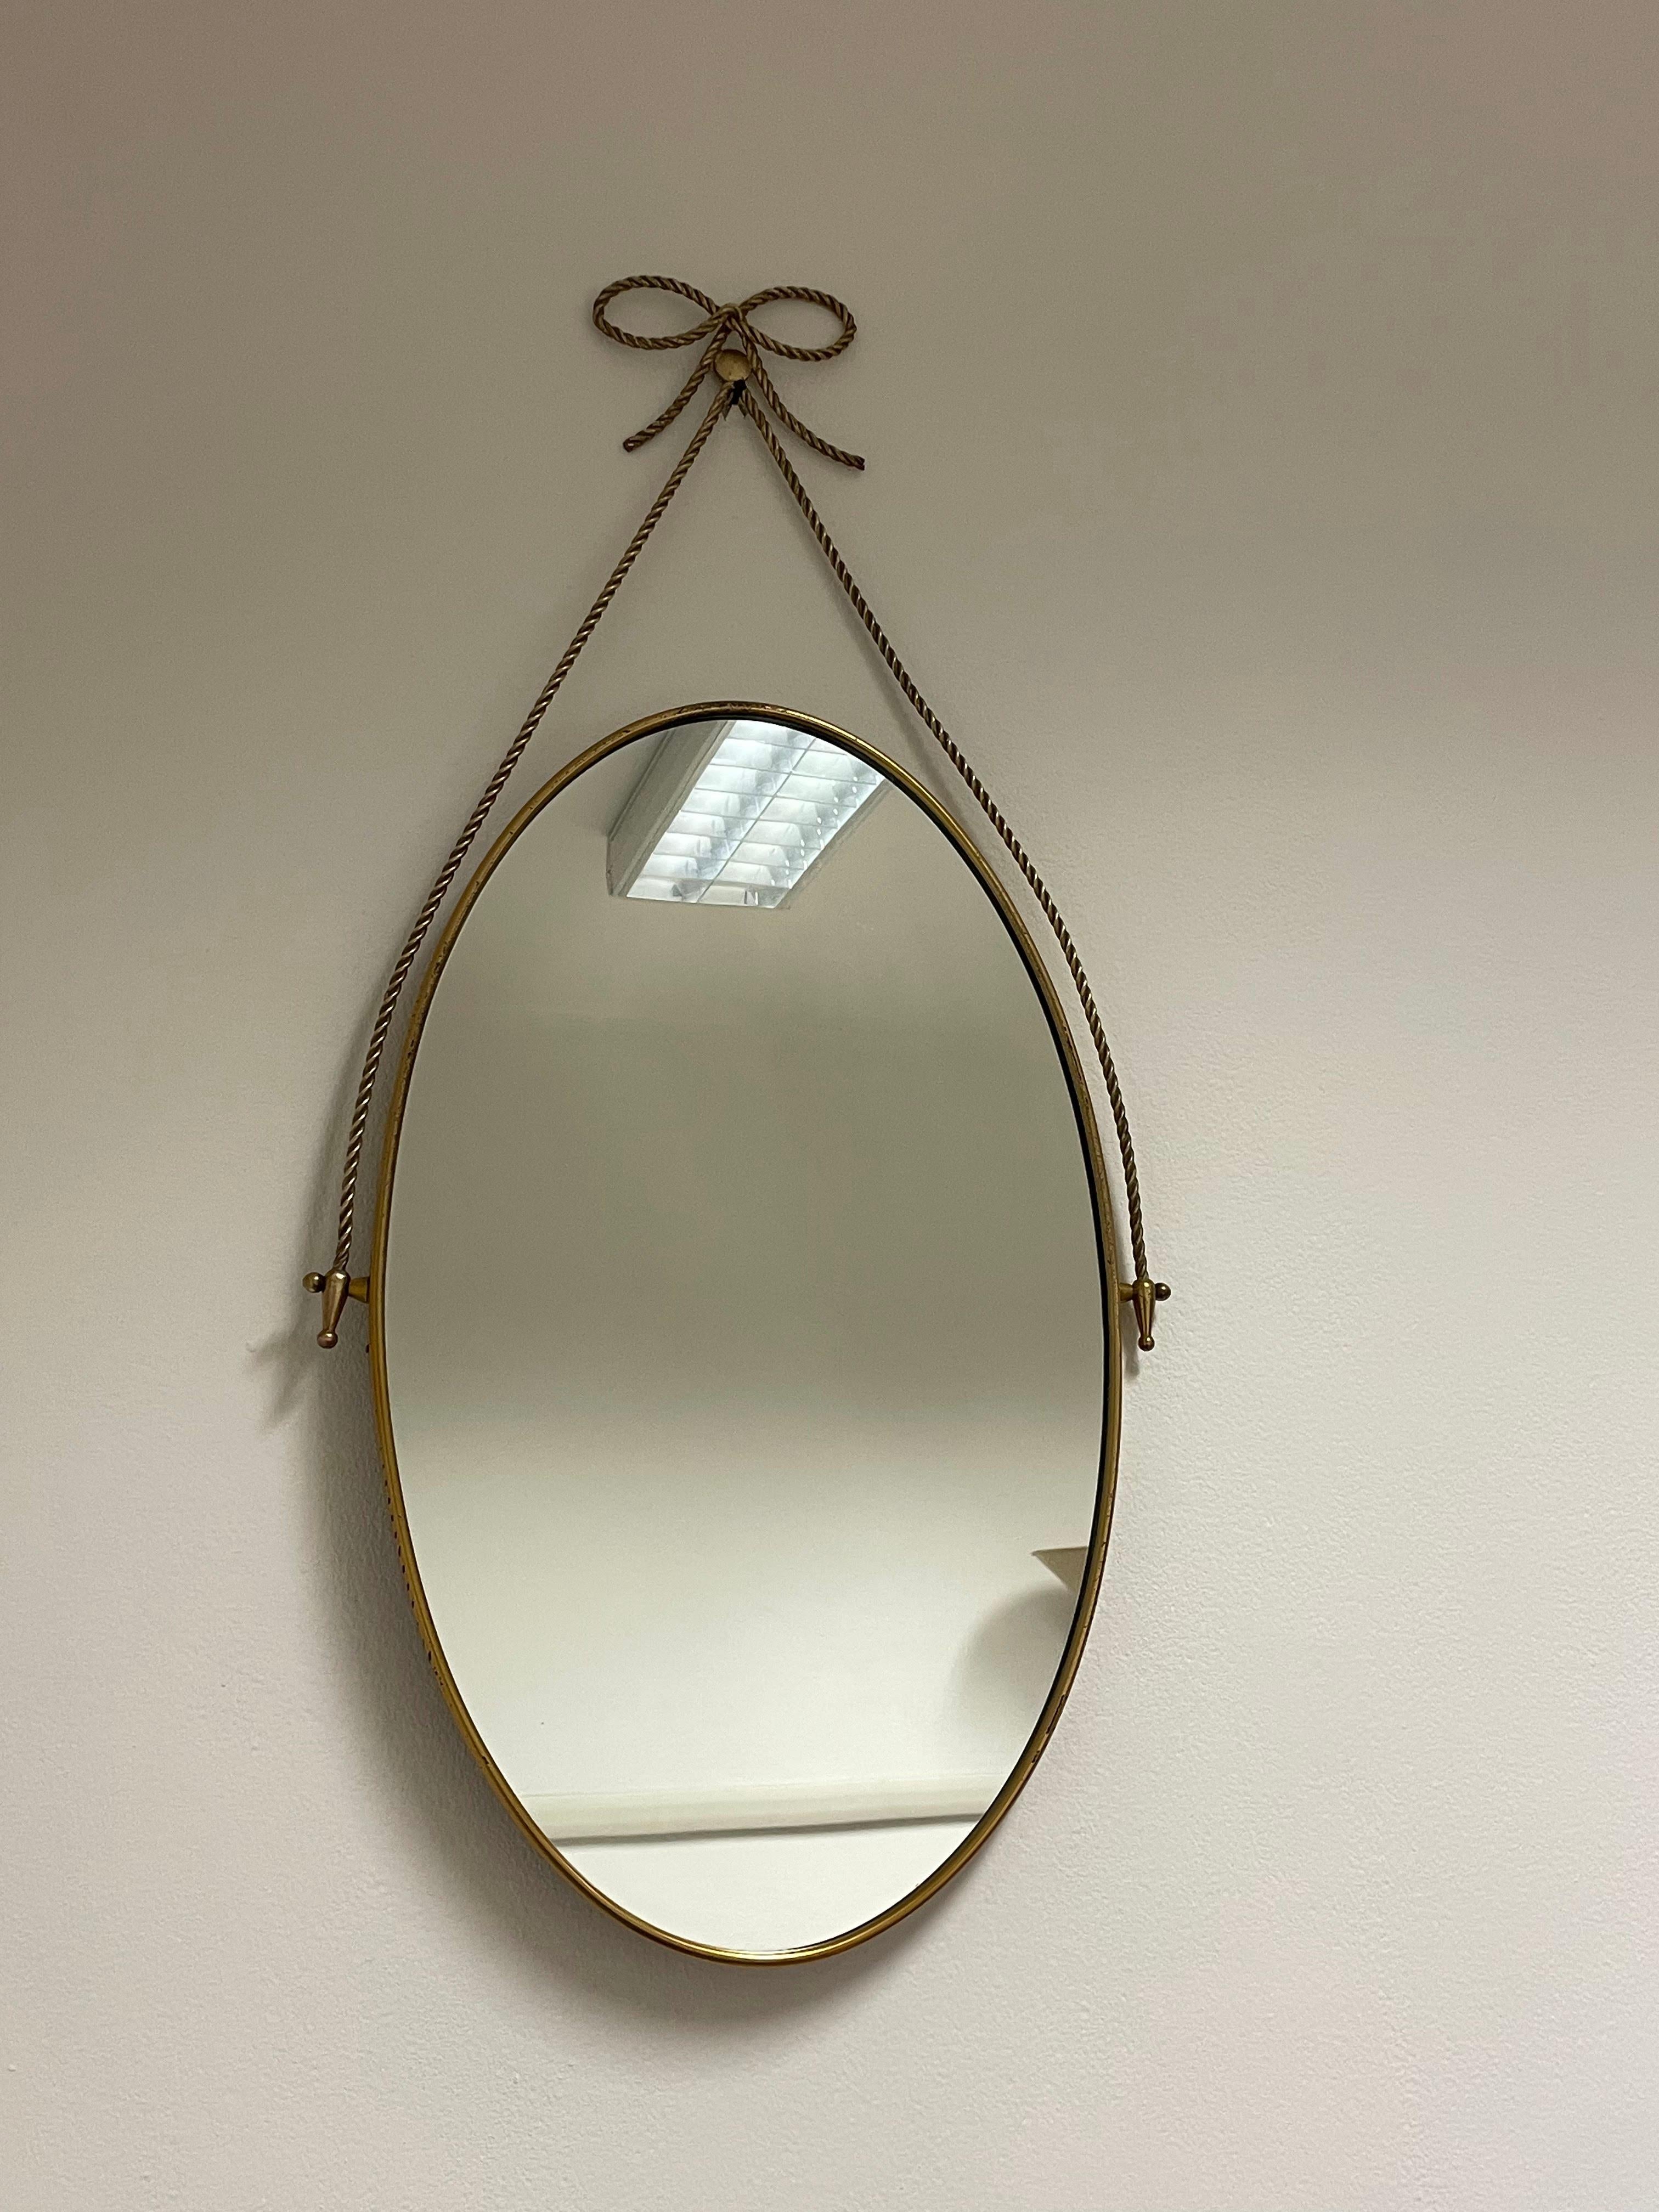 Mid-20th Century Oval mirror with brass frame and motif 1950s, Italian manufacture For Sale